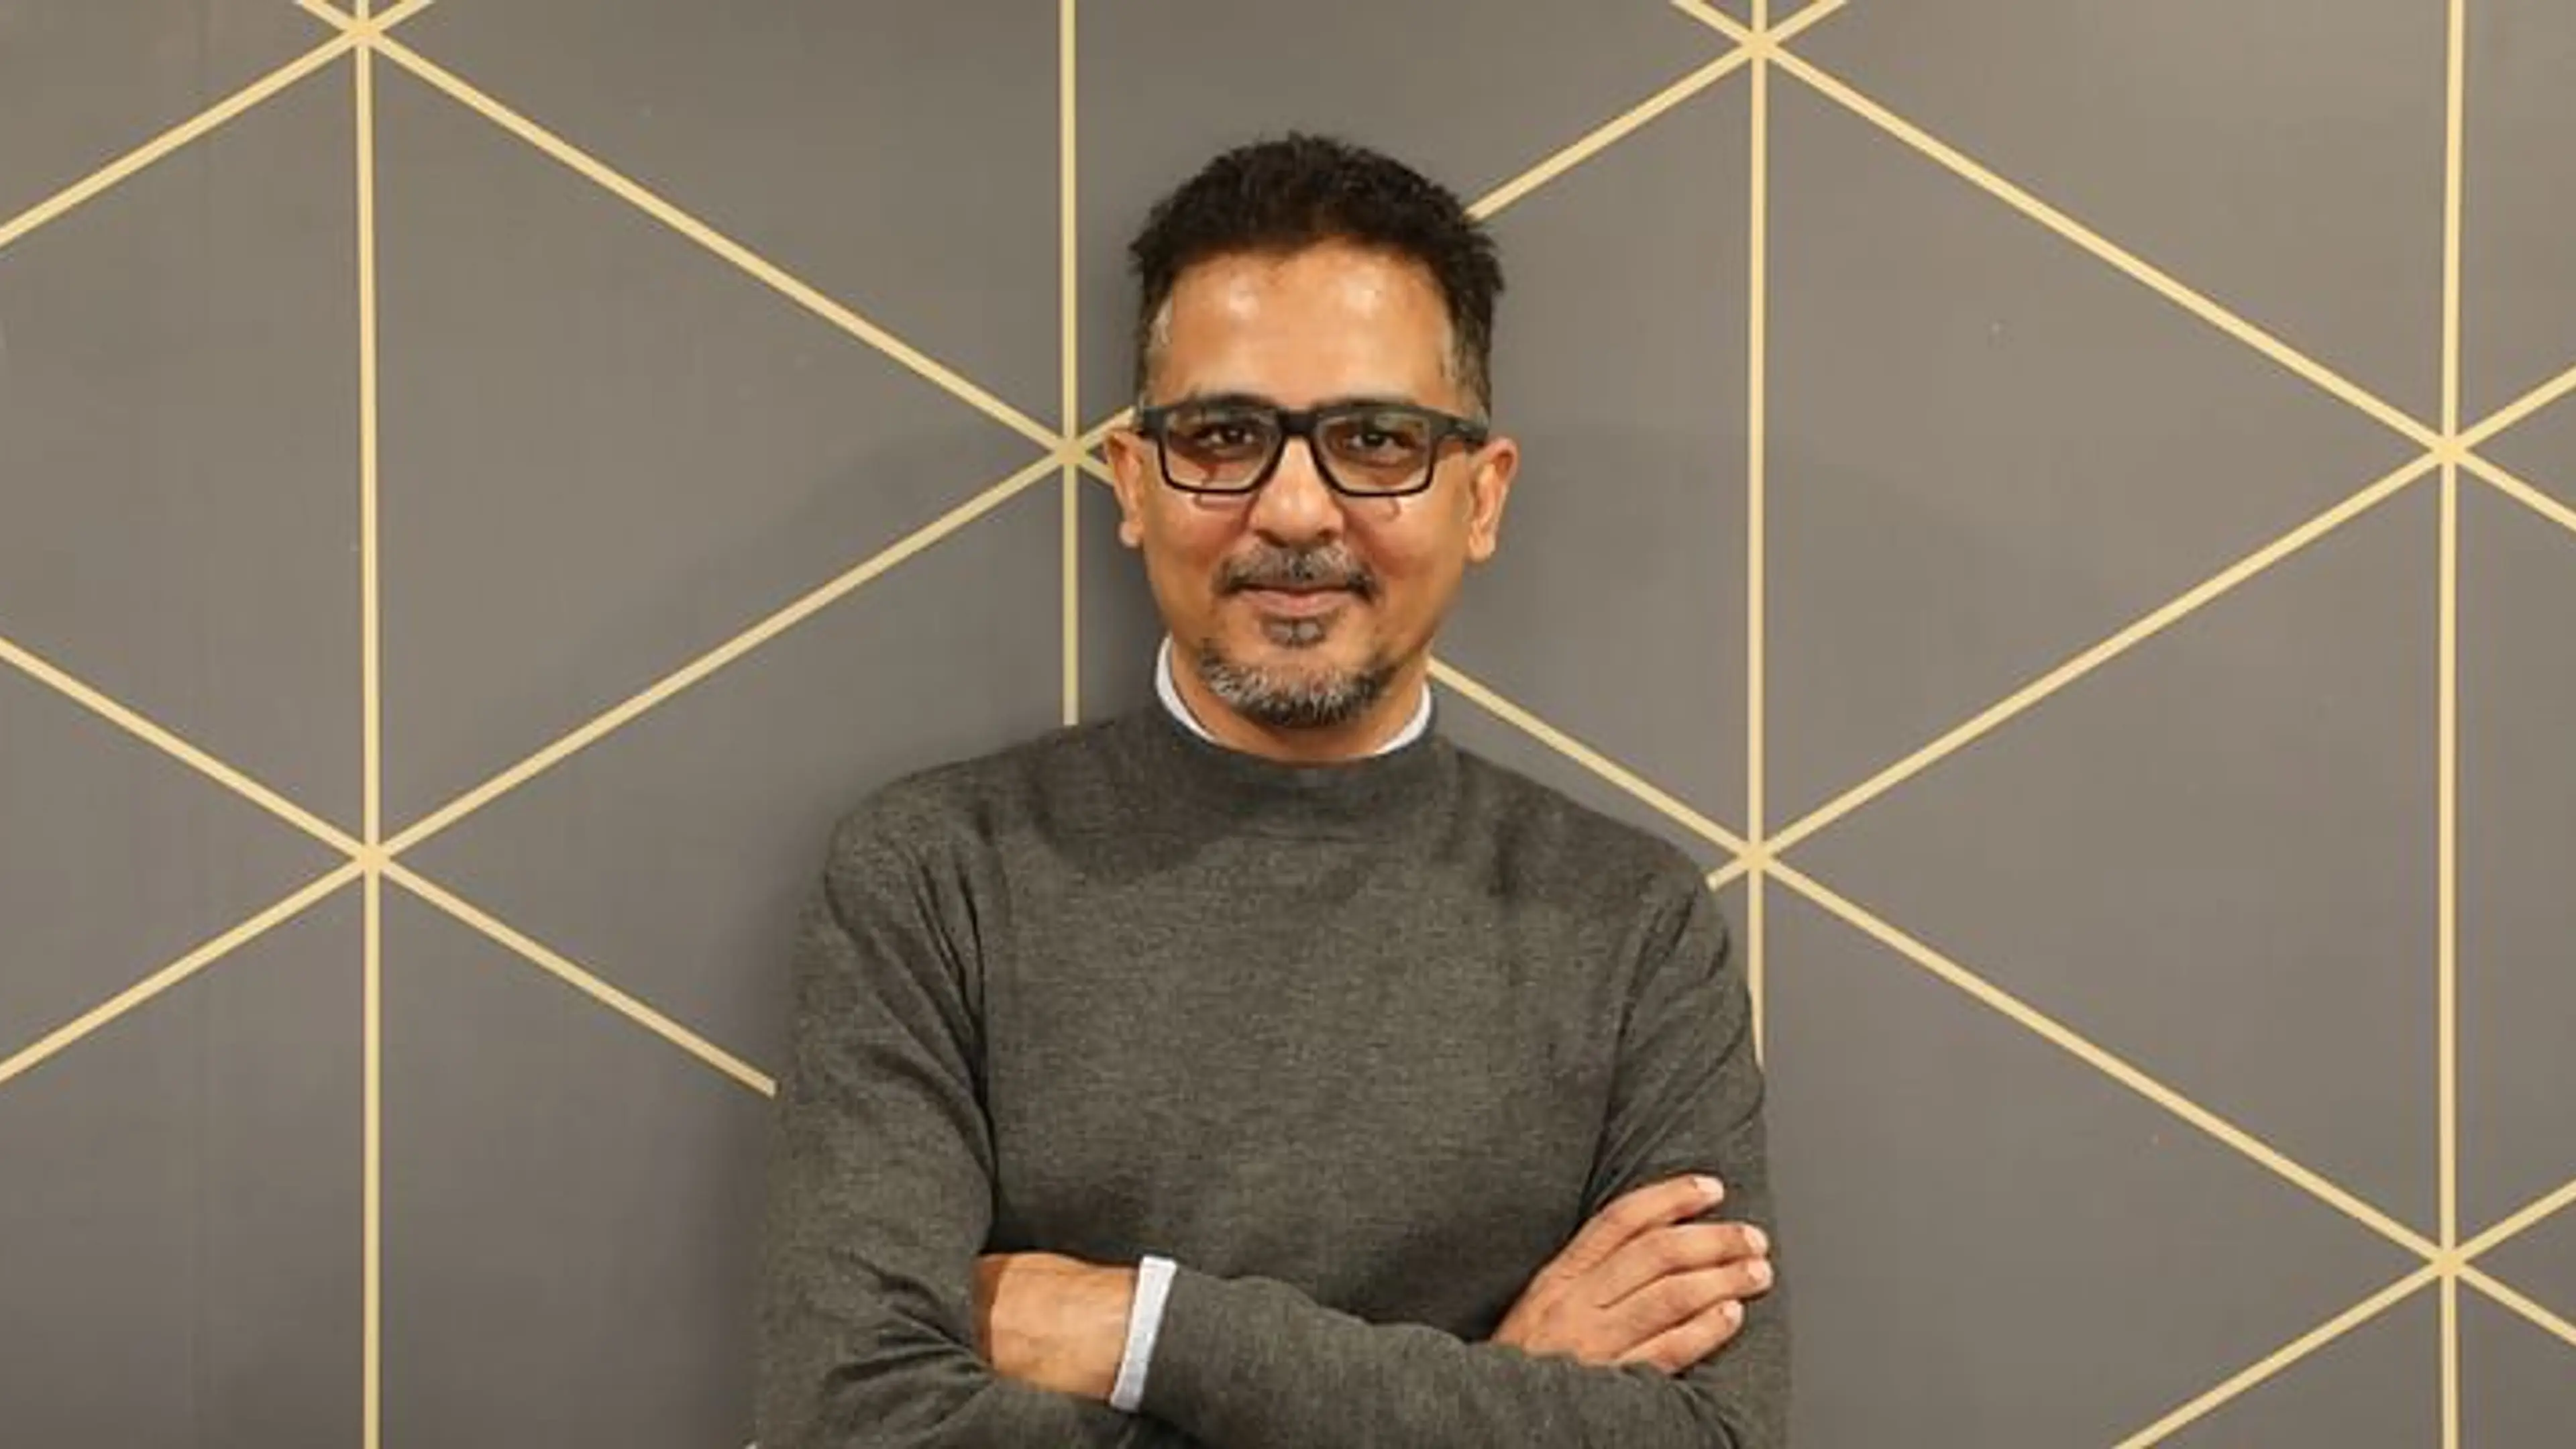 Outlook 2021: This year will see the resurgence of OYO, says CEO Rohit Kapoor